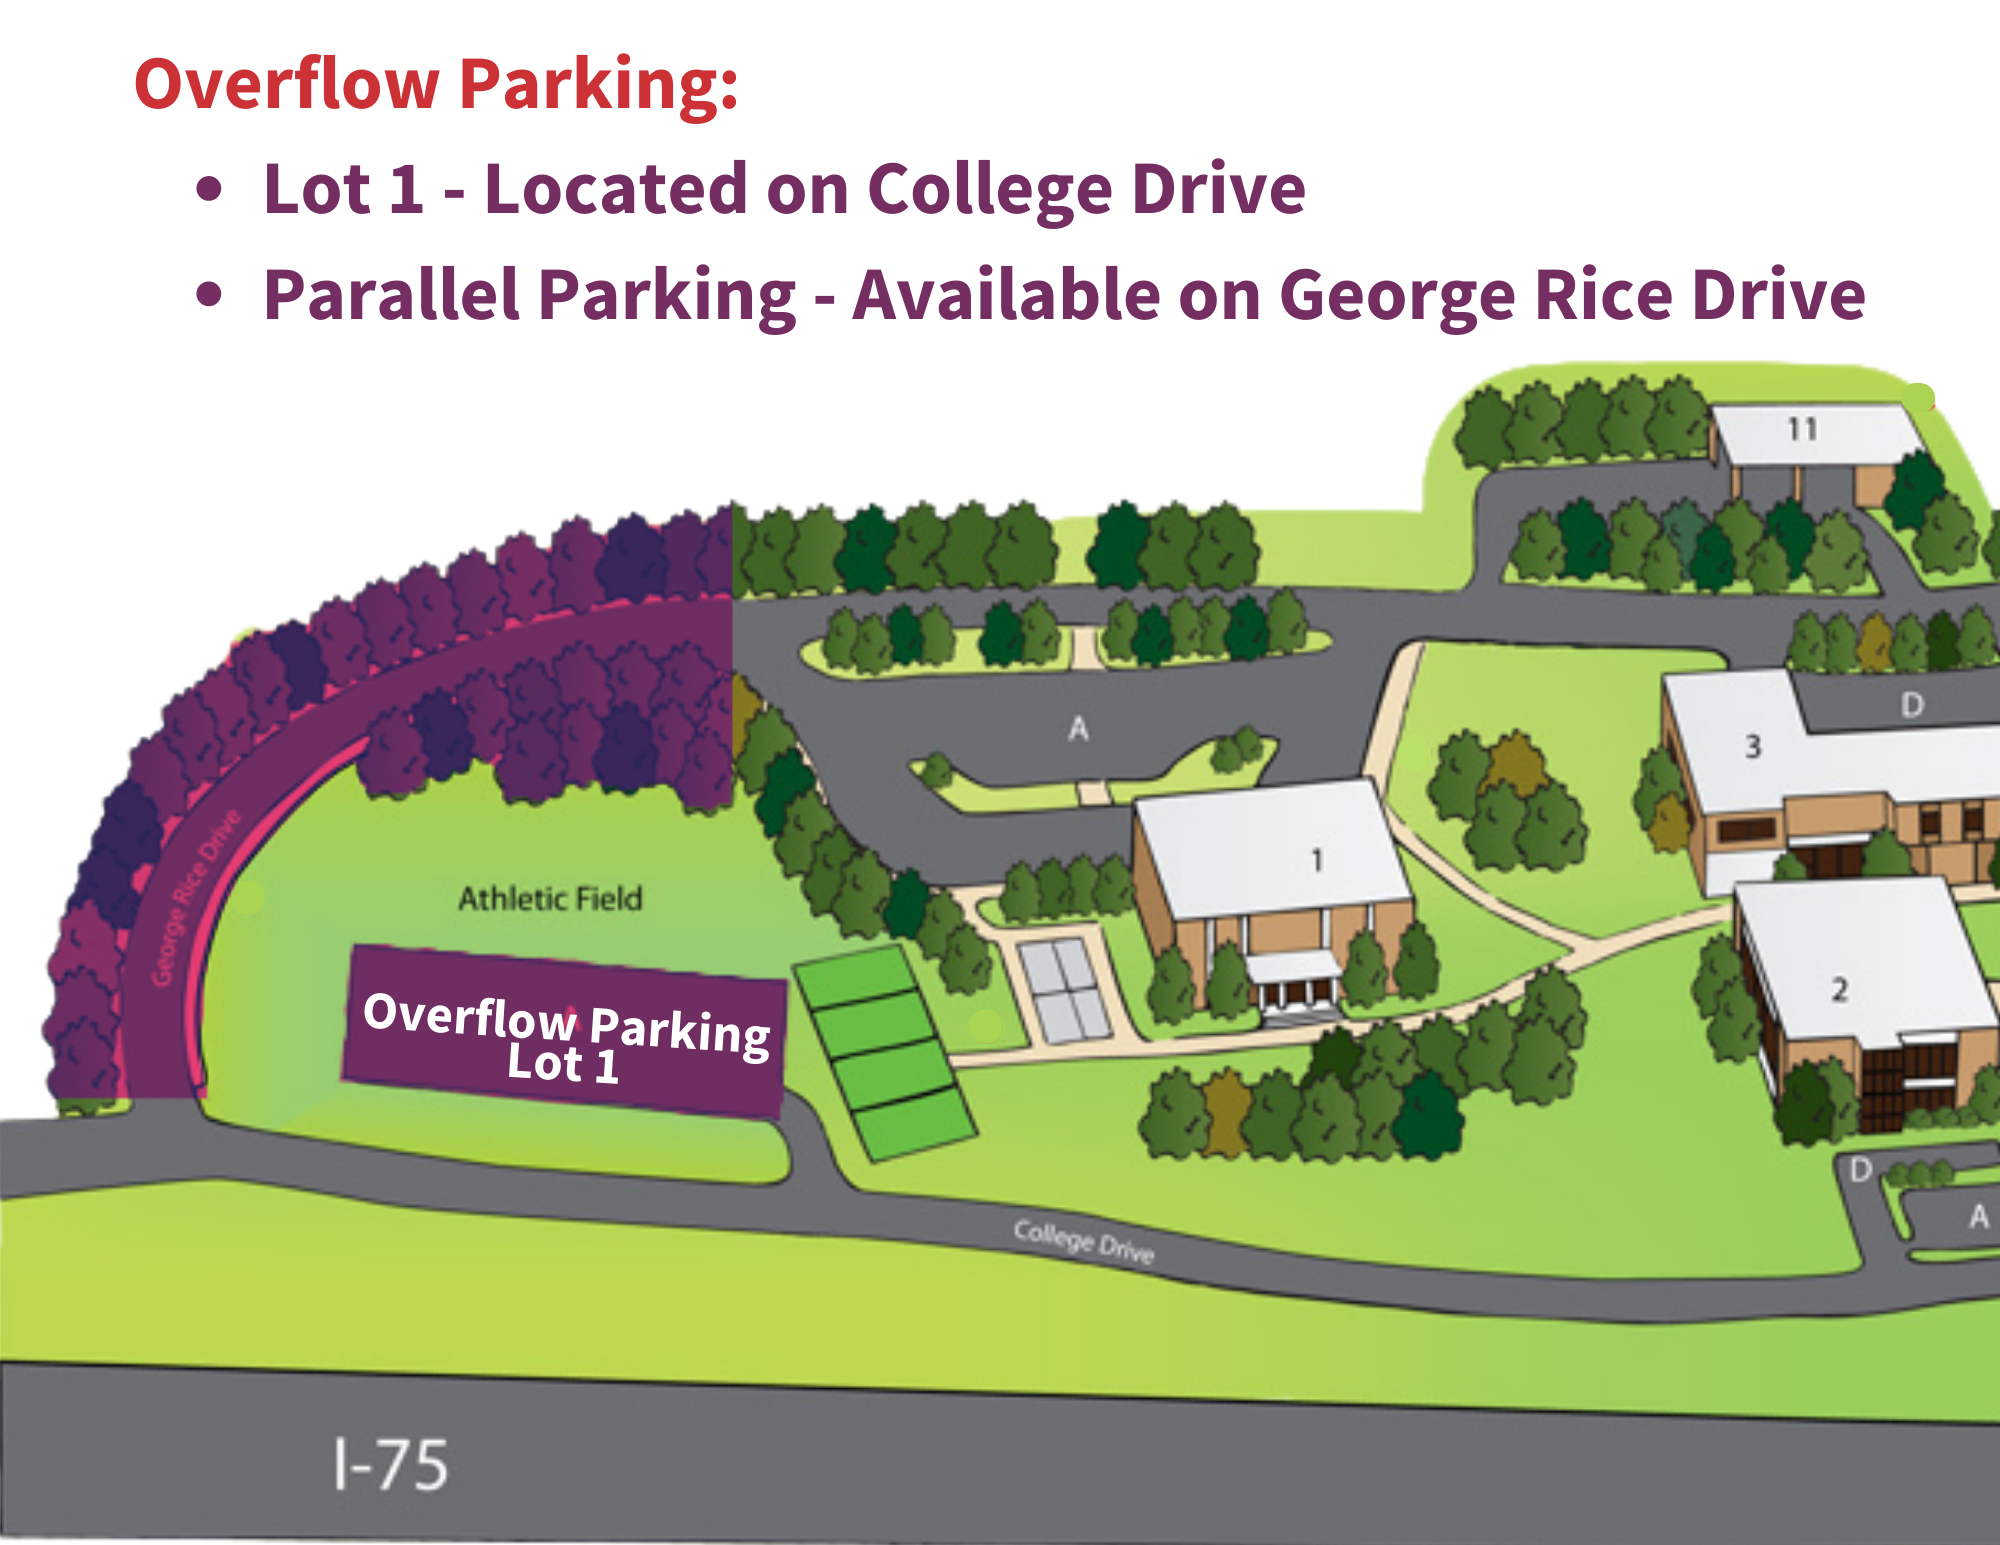 Overflow parking map